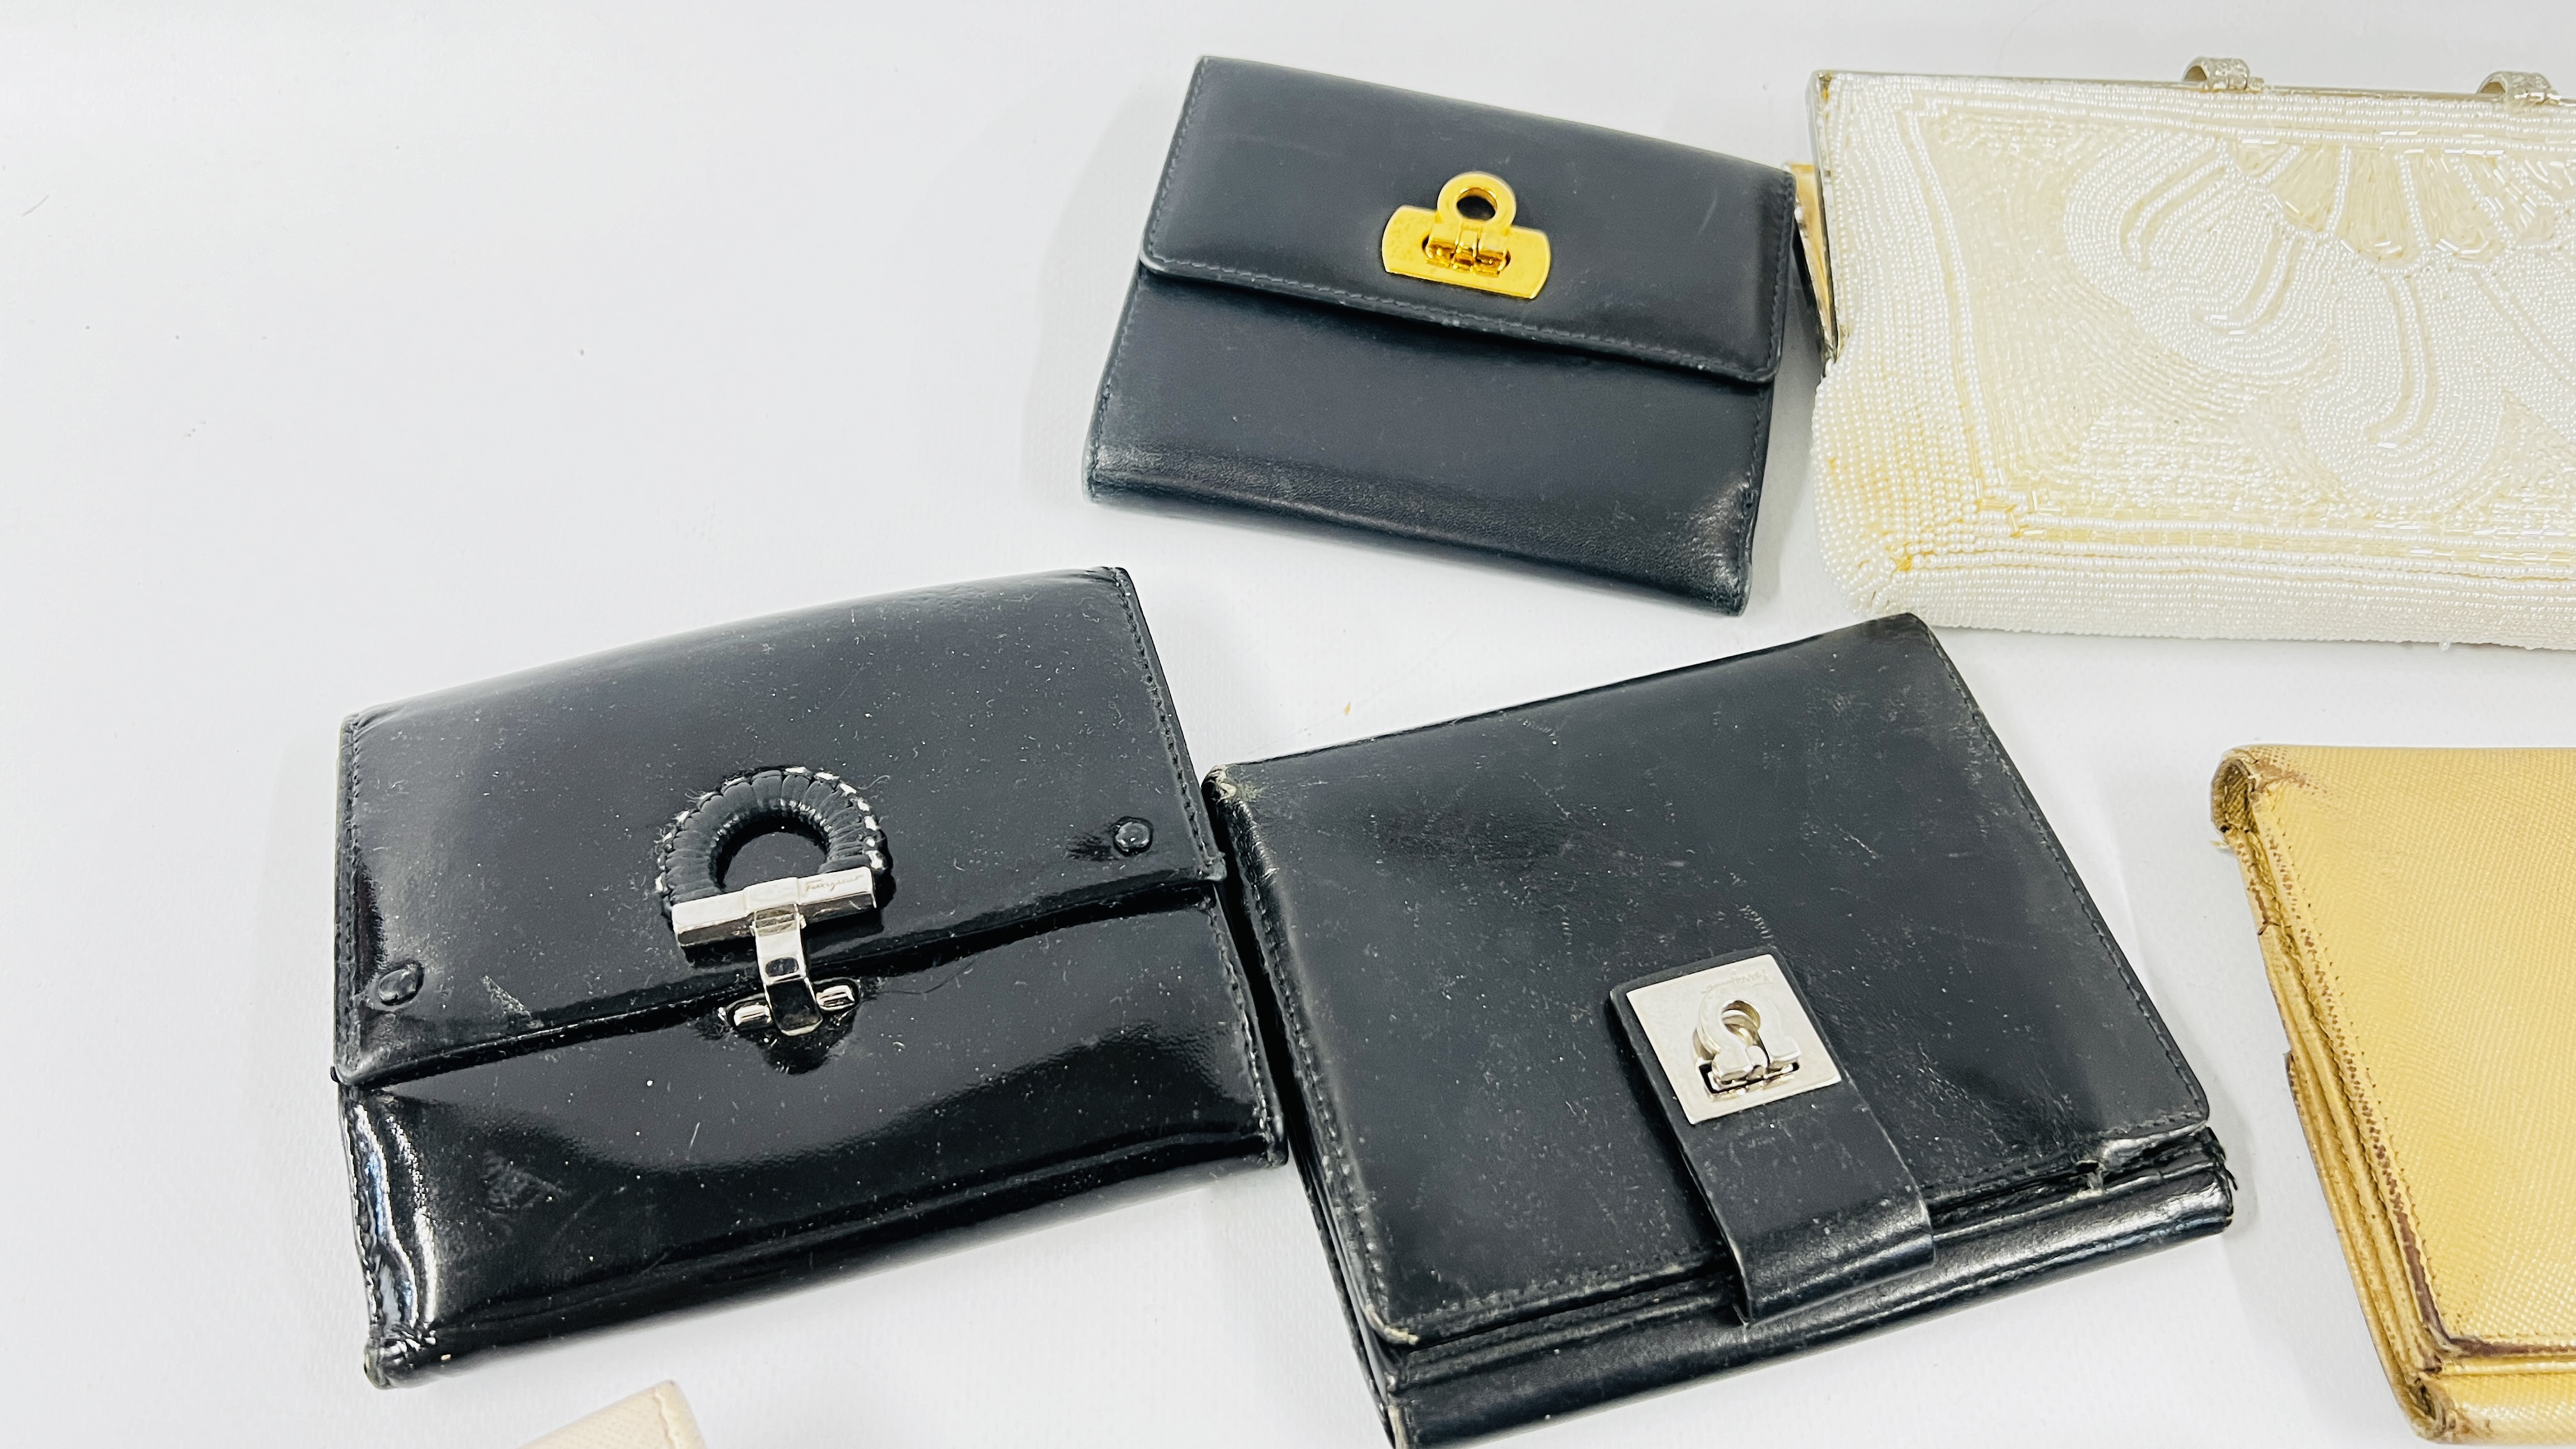 A COLLECTION OF 18 DESIGNER PURSES AND KEY HOLDERS MARKED "SALVADOR FERRAGAMA" + A FURTHER - Image 4 of 7